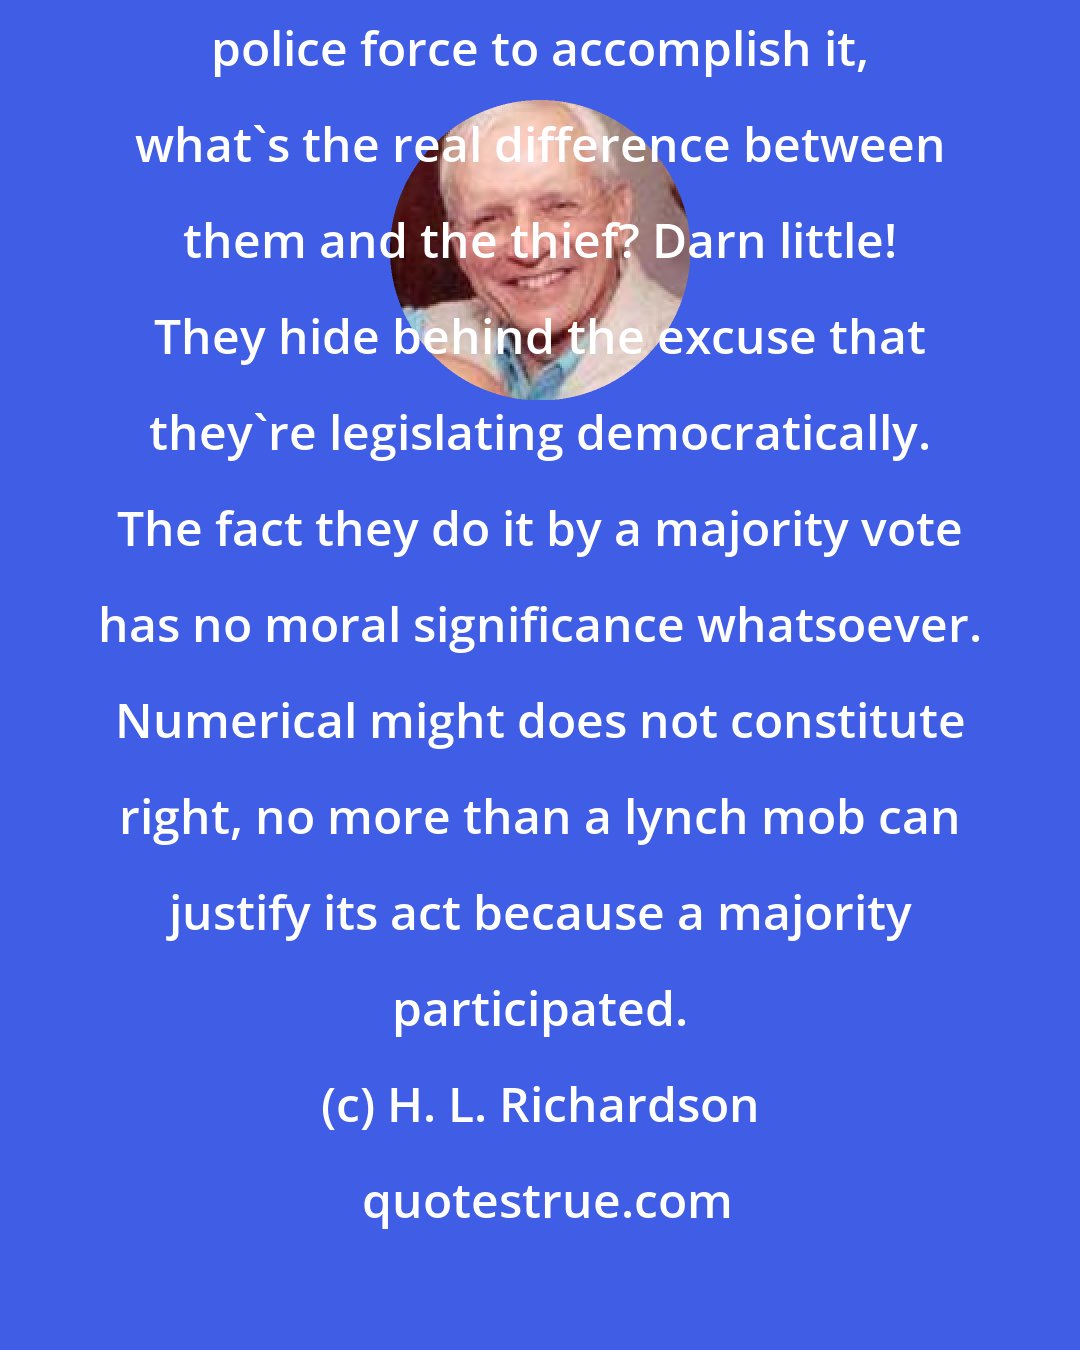 H. L. Richardson: When a legislature decides to steal some of our rights and plans to use police force to accomplish it, what's the real difference between them and the thief? Darn little! They hide behind the excuse that they're legislating democratically. The fact they do it by a majority vote has no moral significance whatsoever. Numerical might does not constitute right, no more than a lynch mob can justify its act because a majority participated.